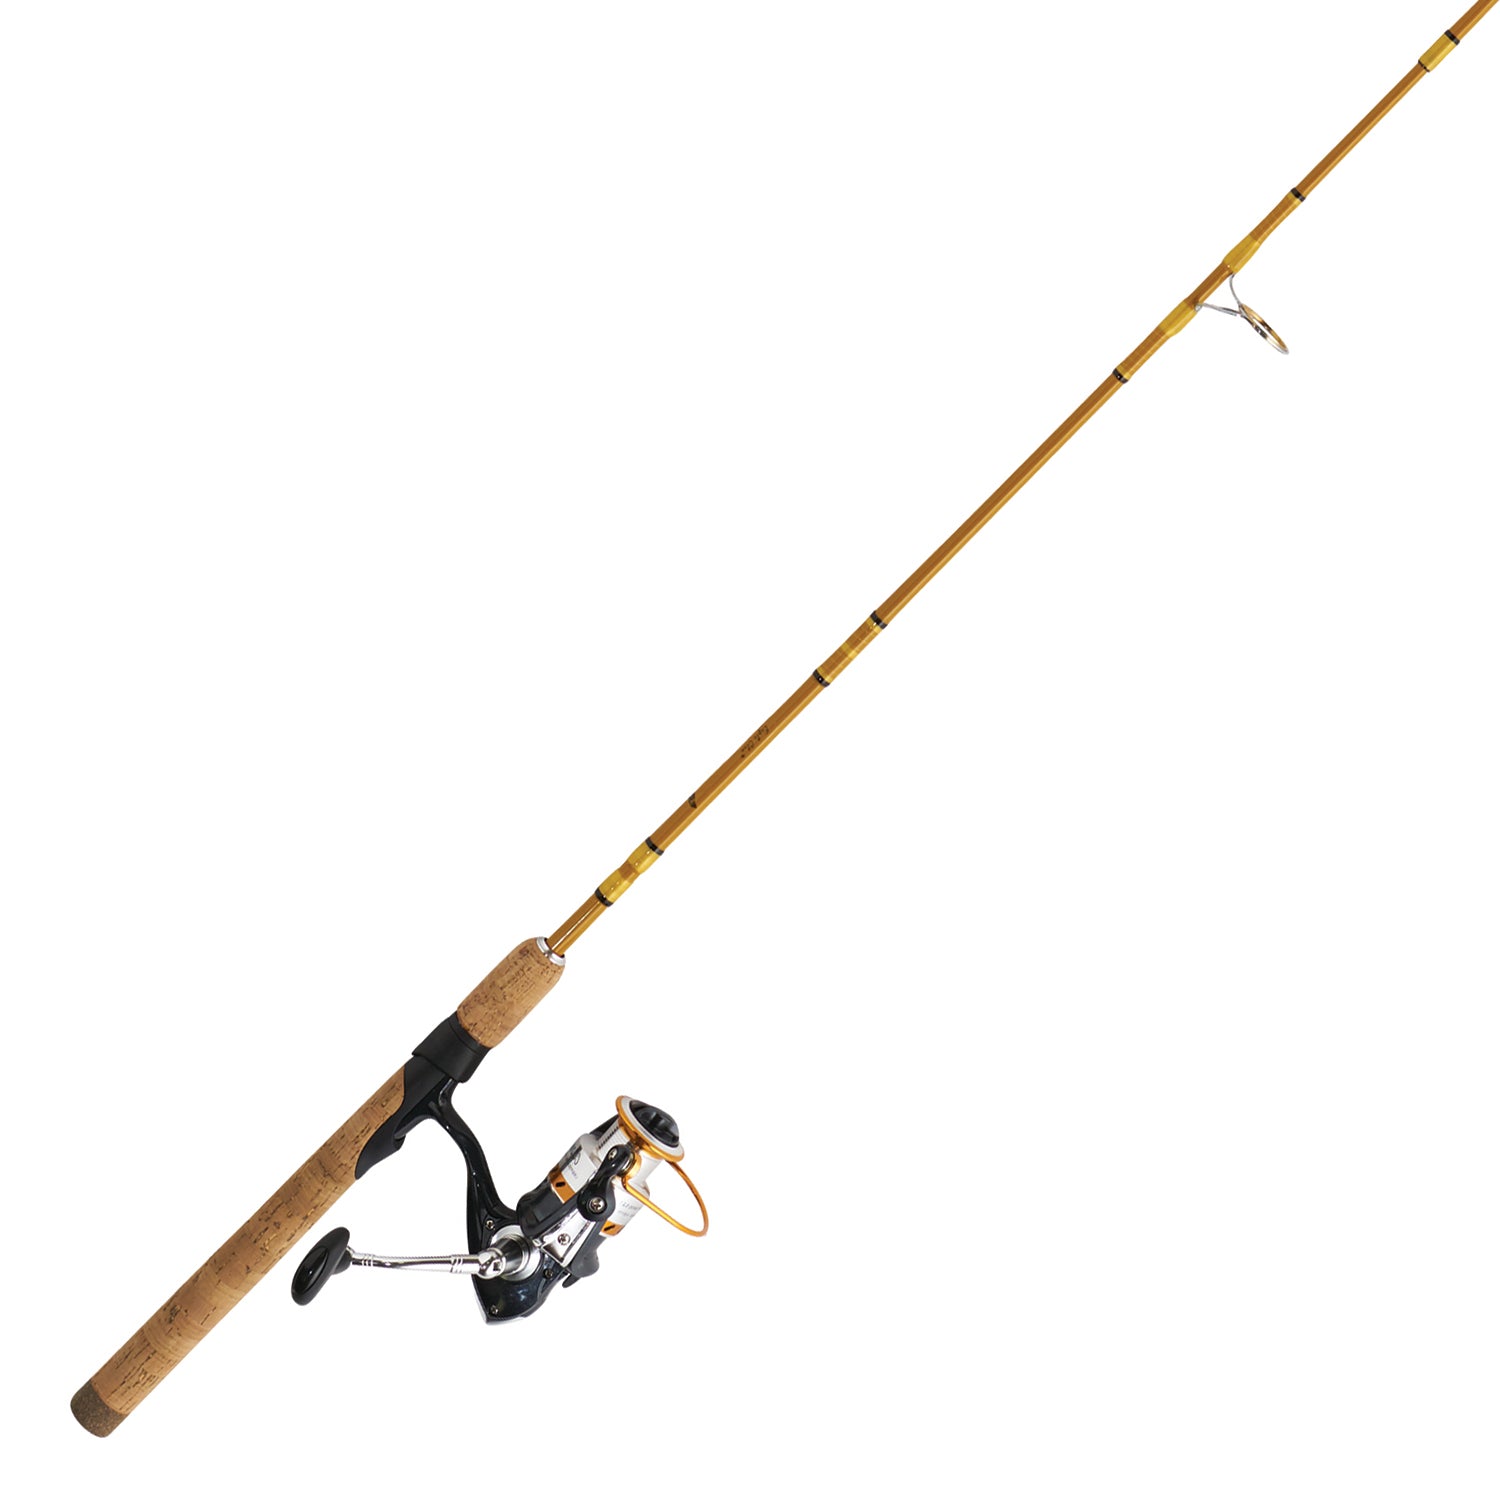 EAGLE CLAW BRAVE EAGLE 3' Ice Fishing Spinning Rod #BRV202-3 FREE